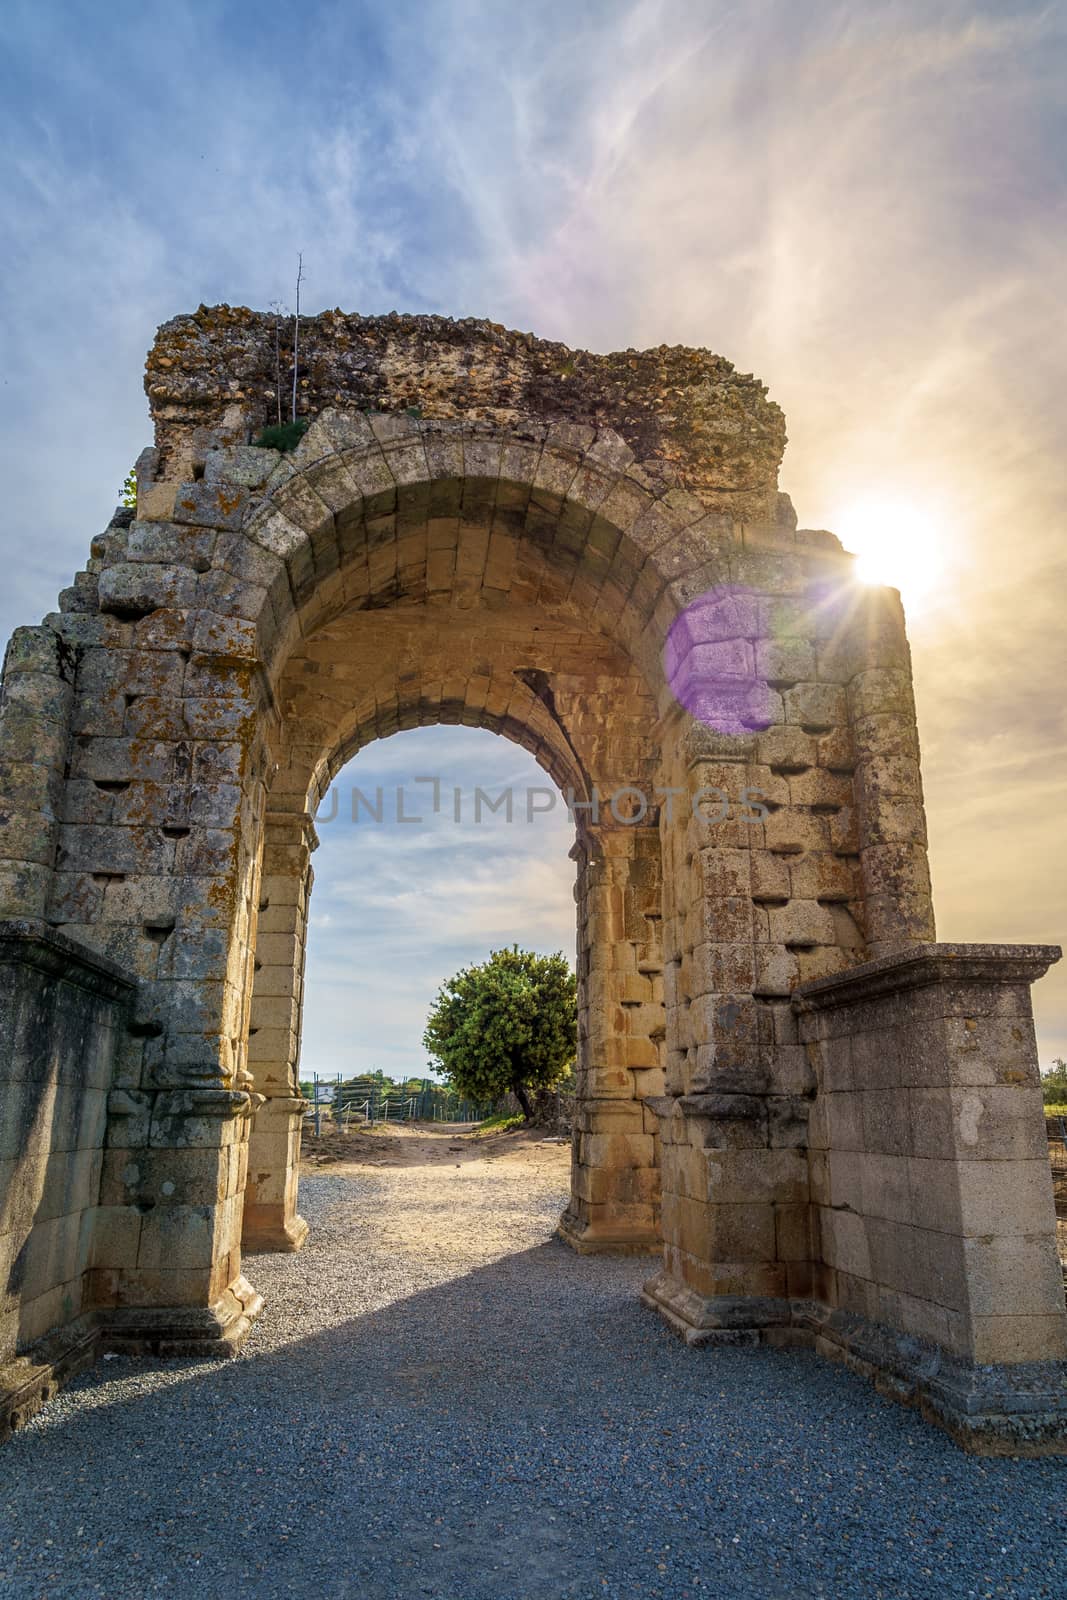 Arch of Caparra, ancient roman city of Caparra in Extremadura, Spain by tanaonte